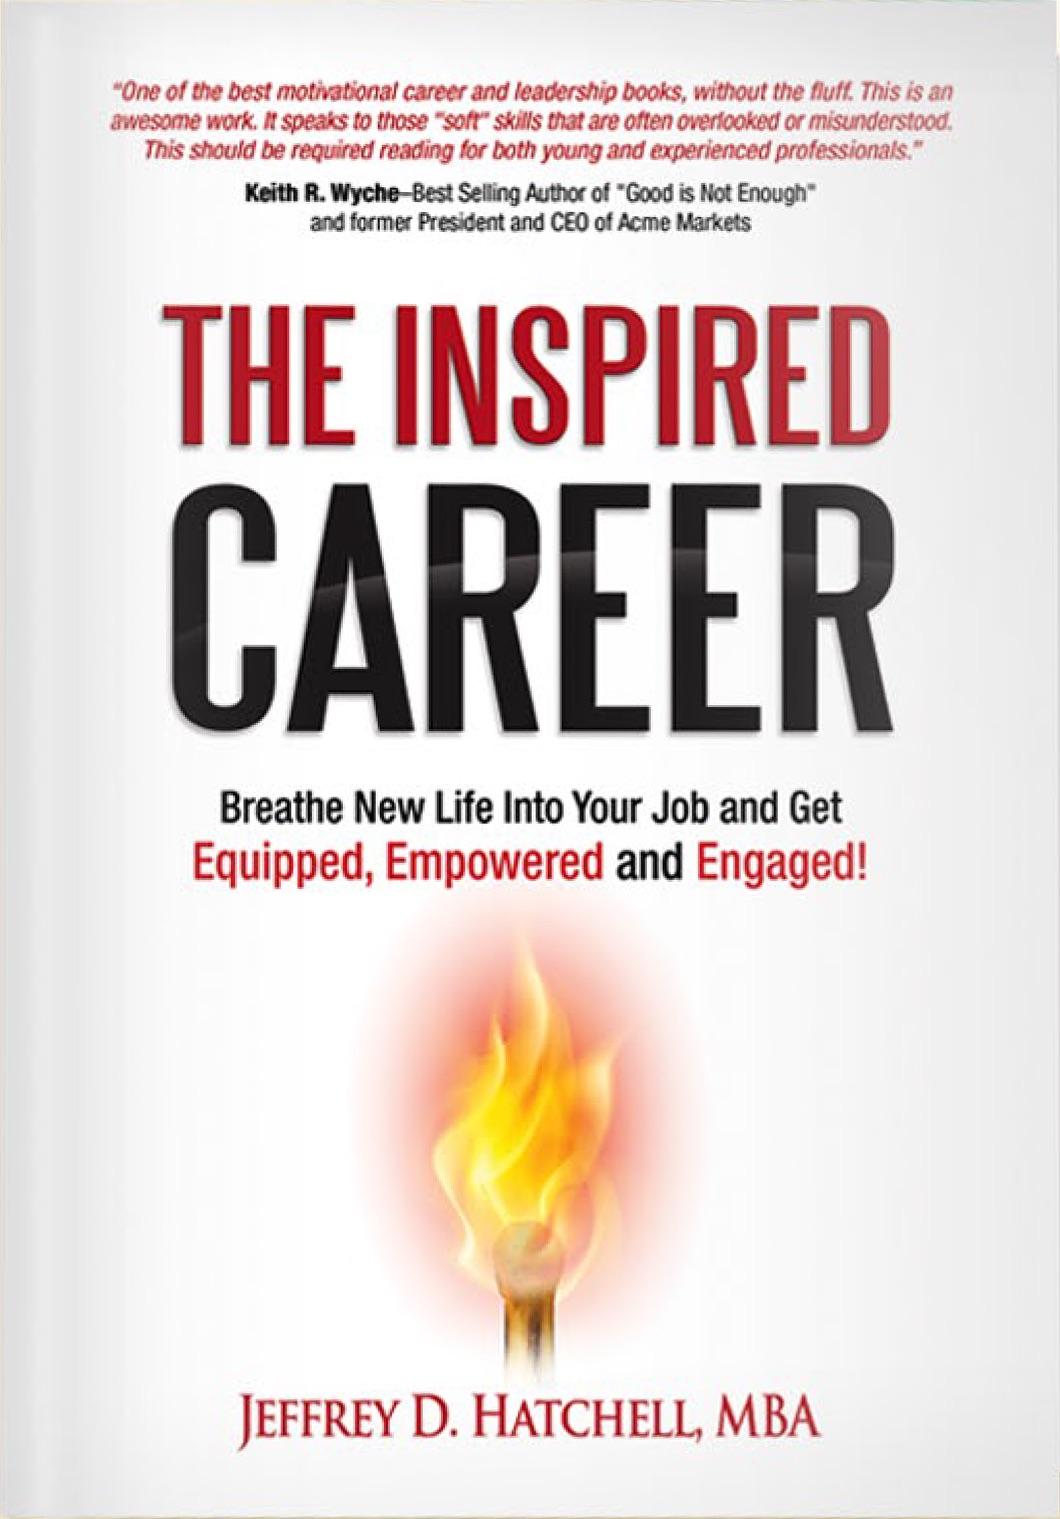 The Inspired Career book cover